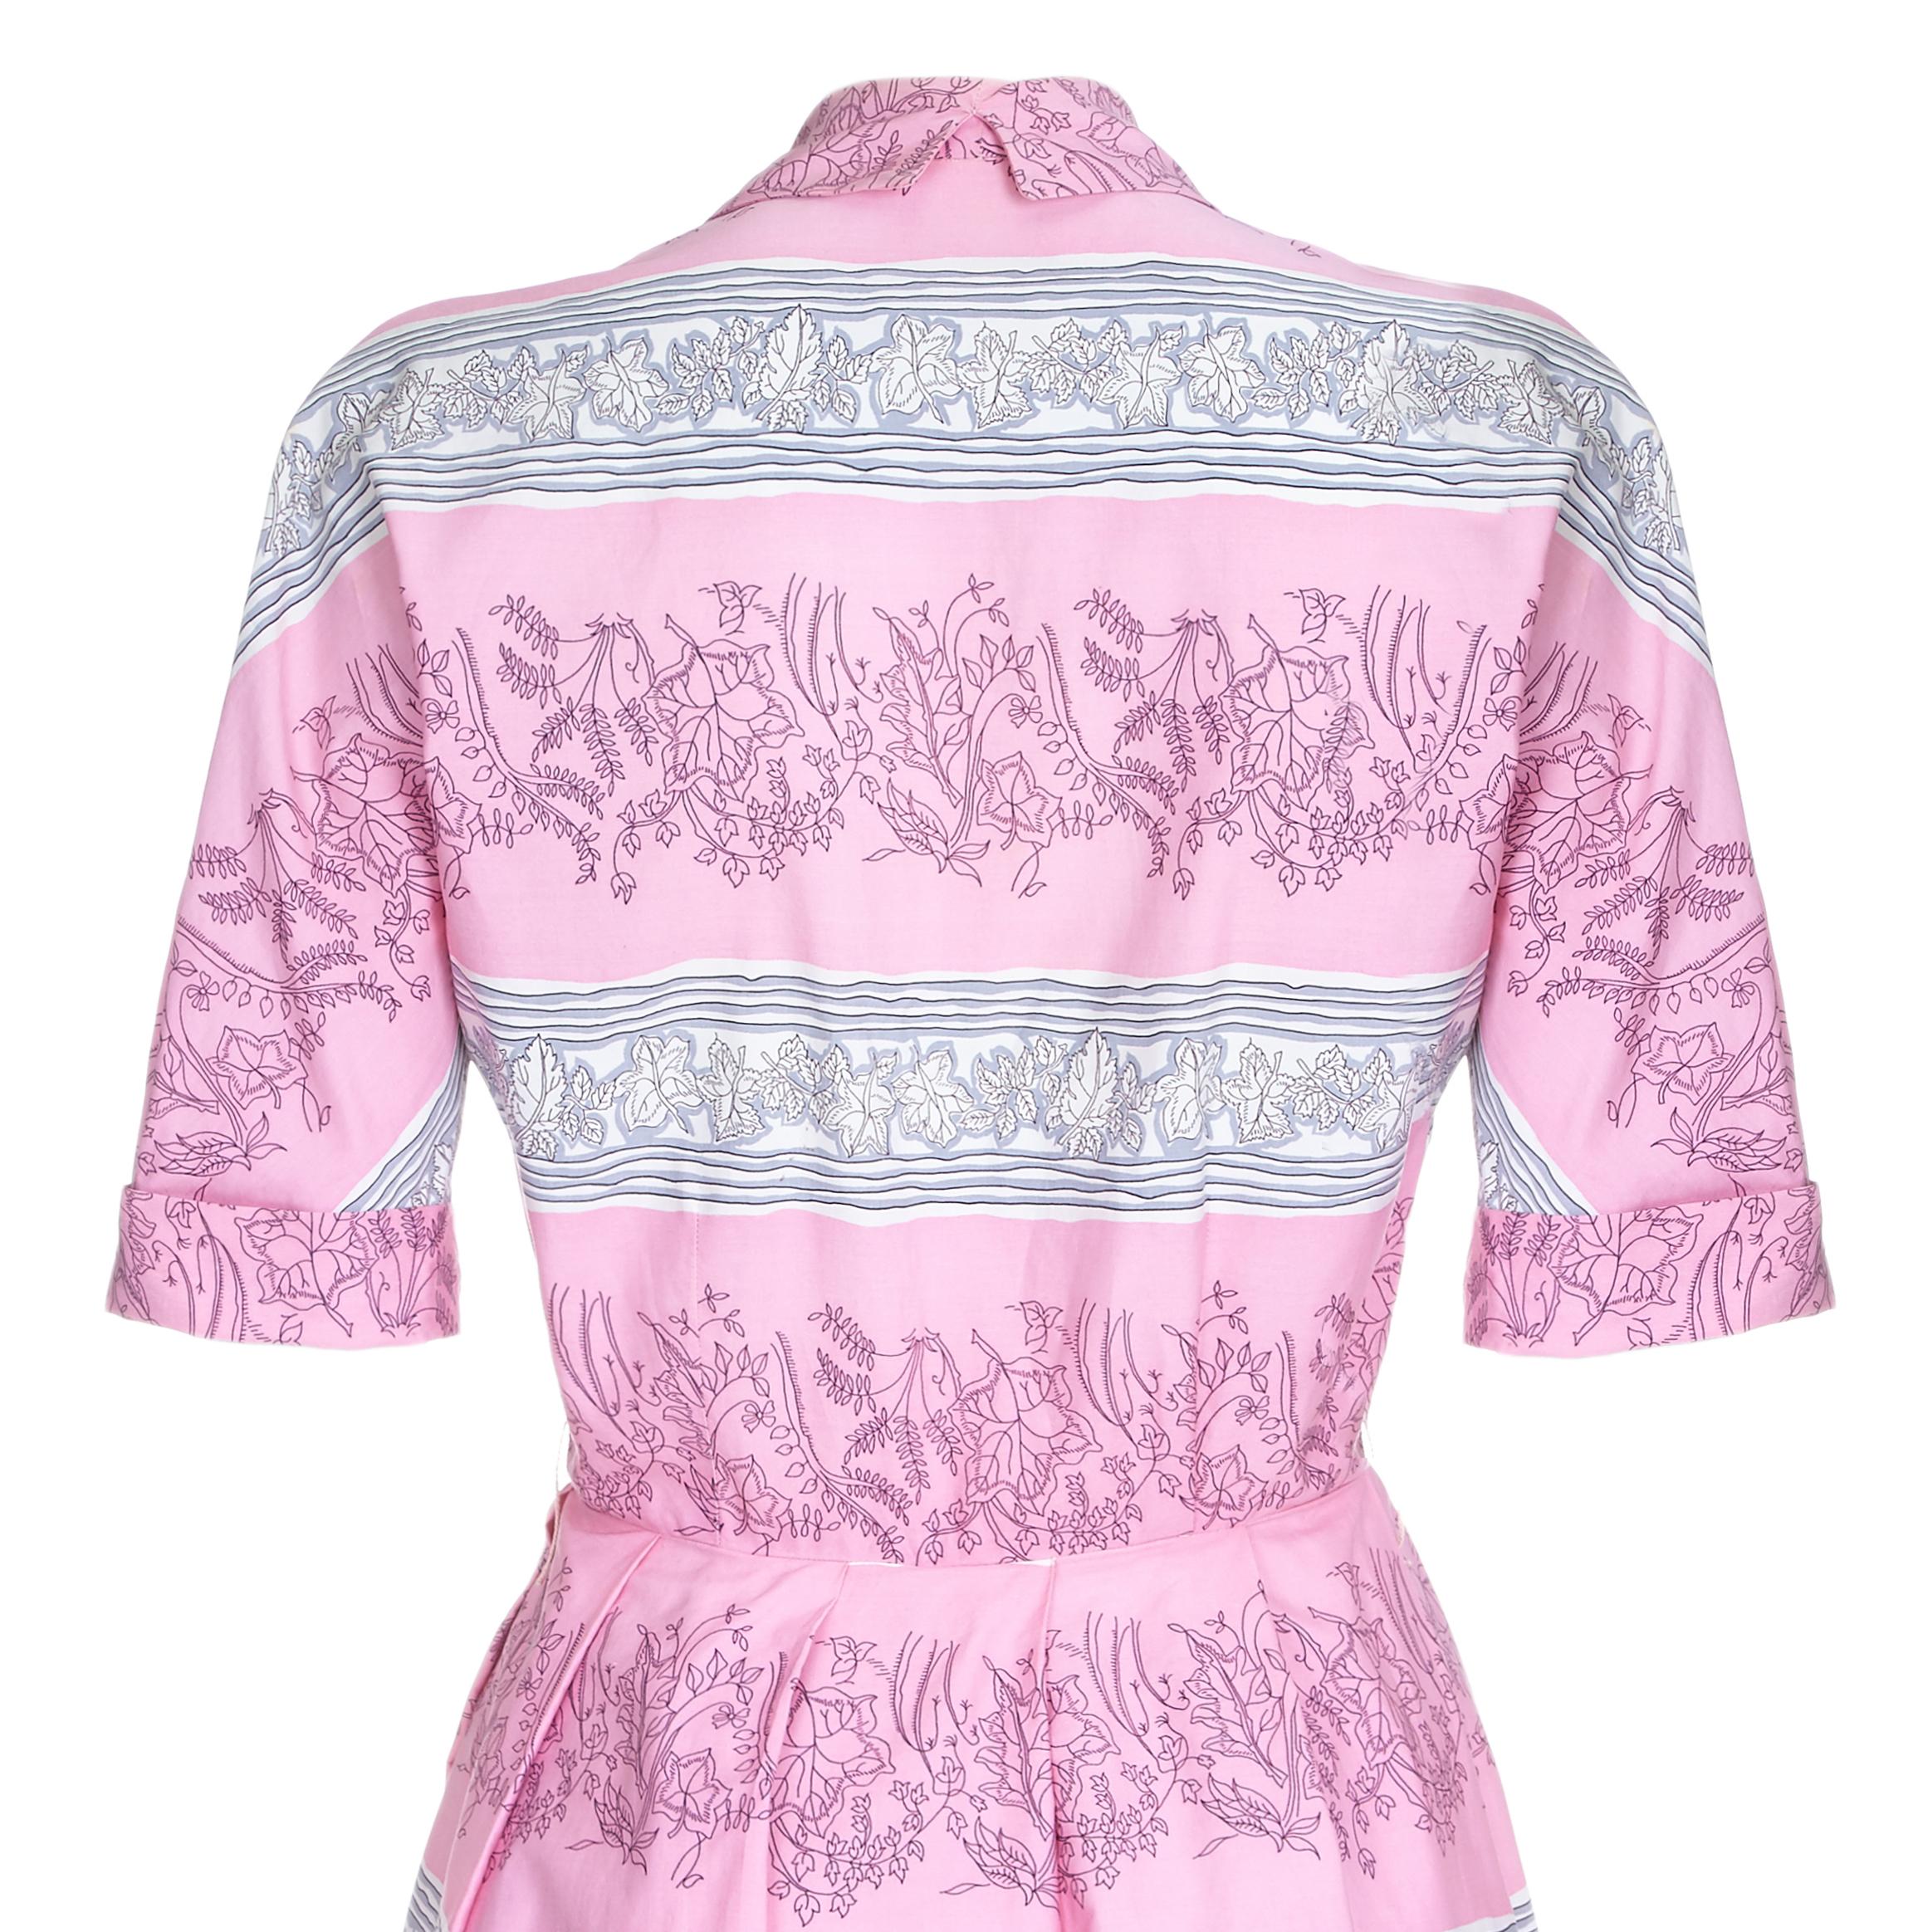 1950s Horrockses Pink Cotton Novelty Ivy Leaf Print Dress In Excellent Condition For Sale In London, GB